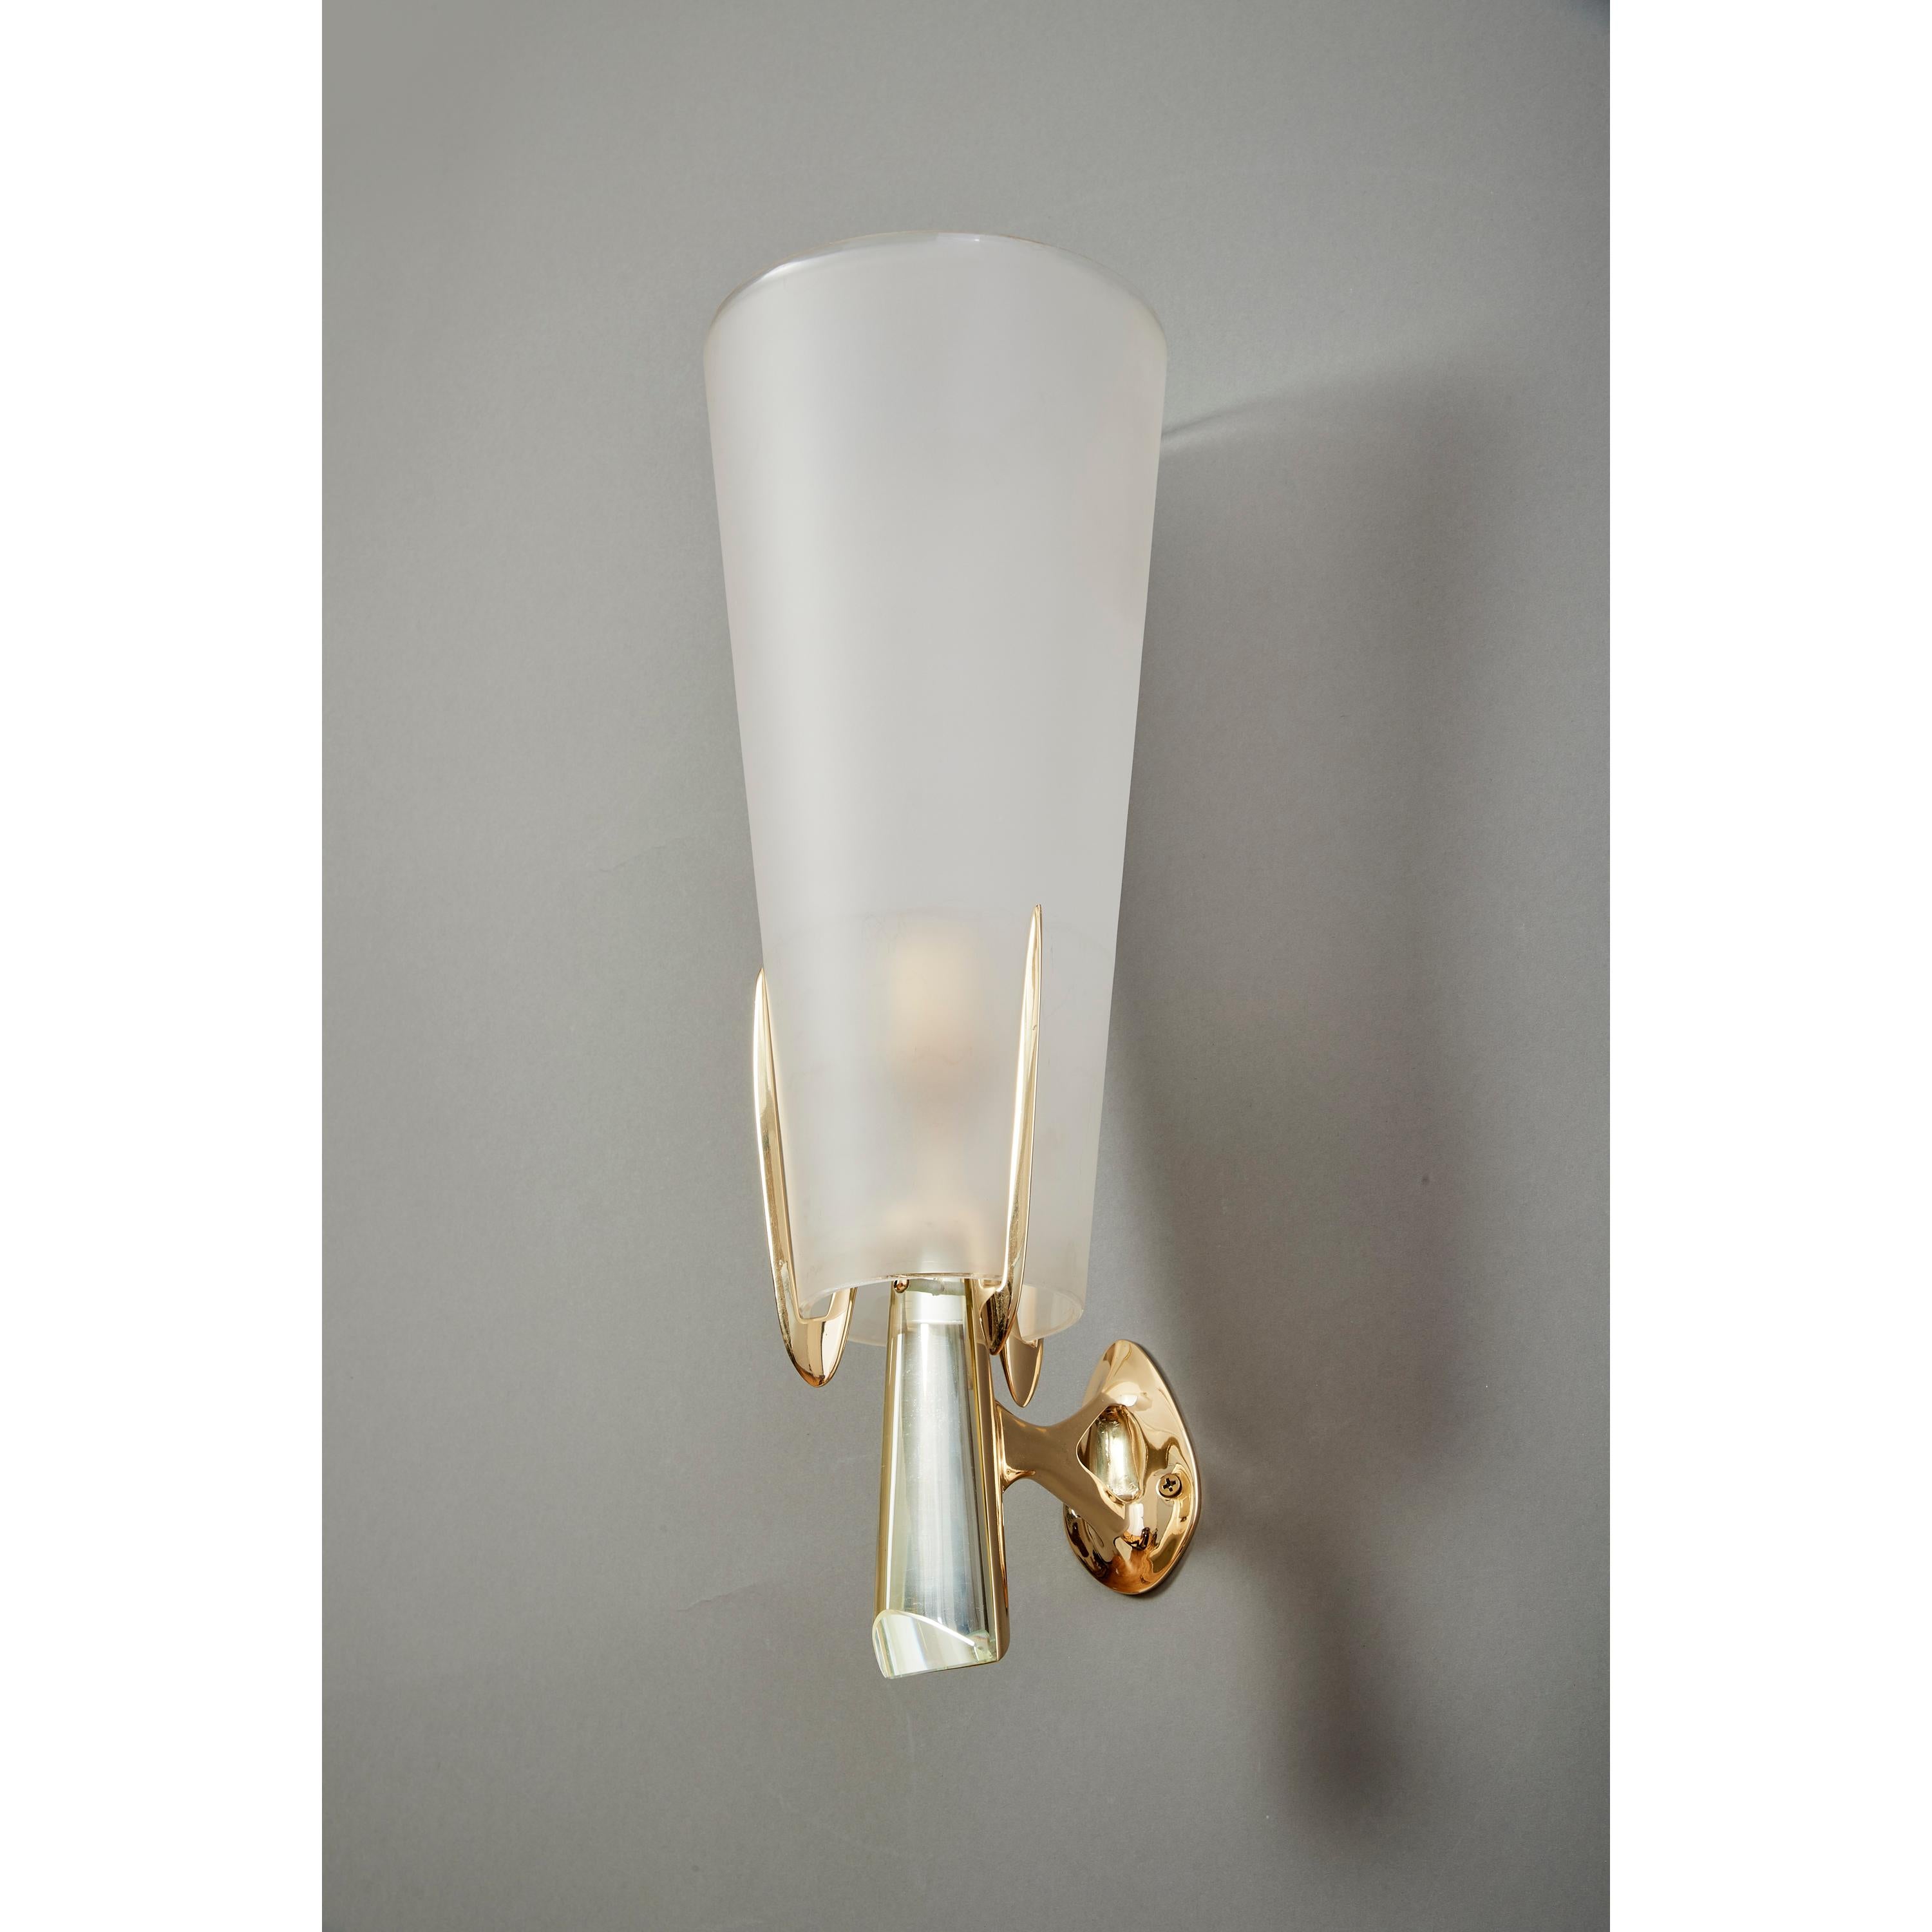 Max Ingrand for Fontana Arte: Rare Sconces in Brass and Crystal, Italy 1955 For Sale 1